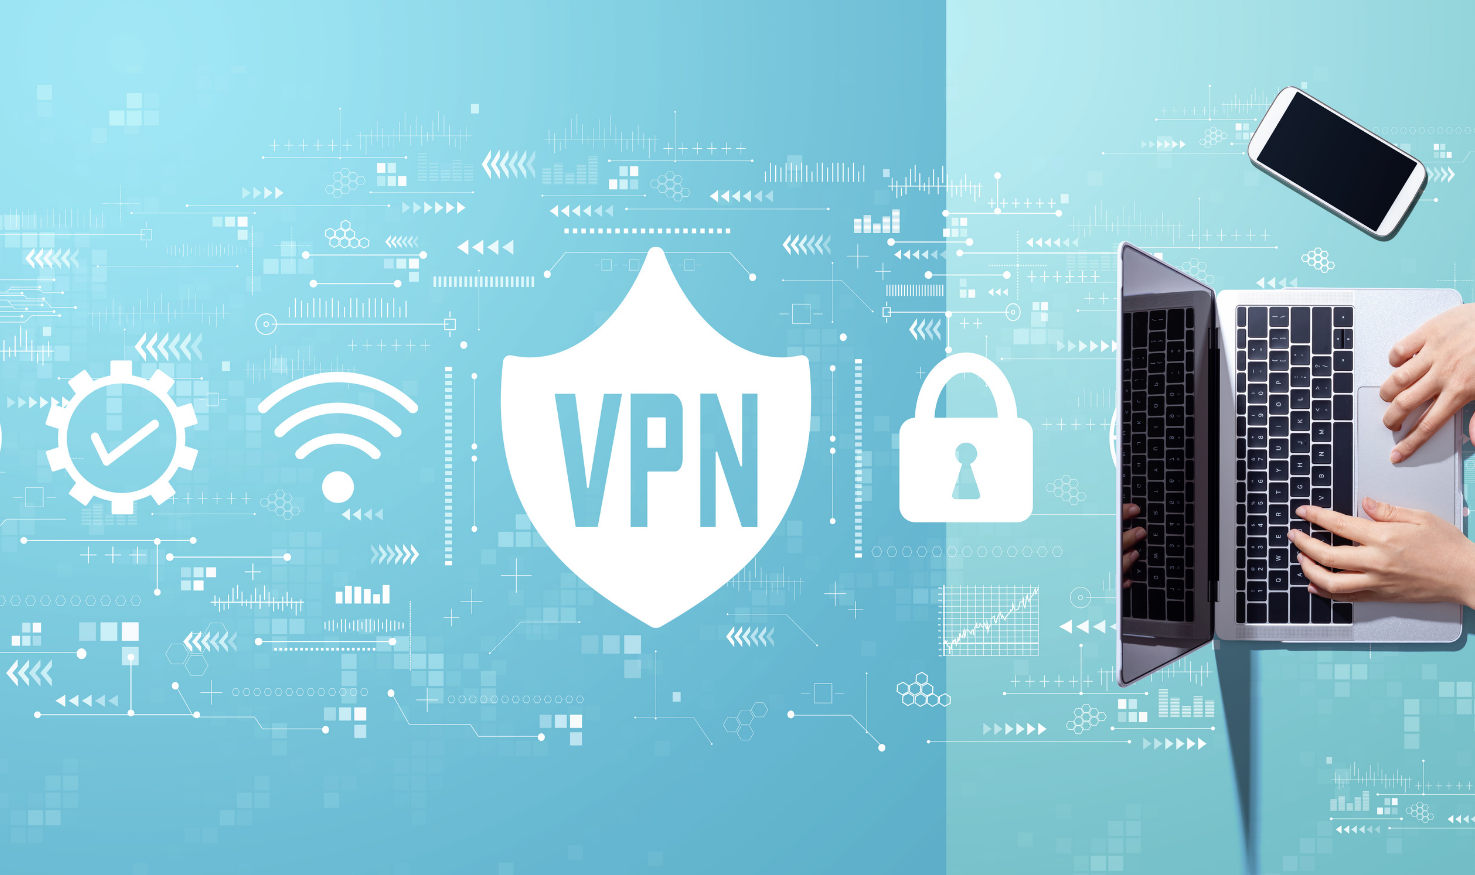 A VPN ensures online privacy and anonymity